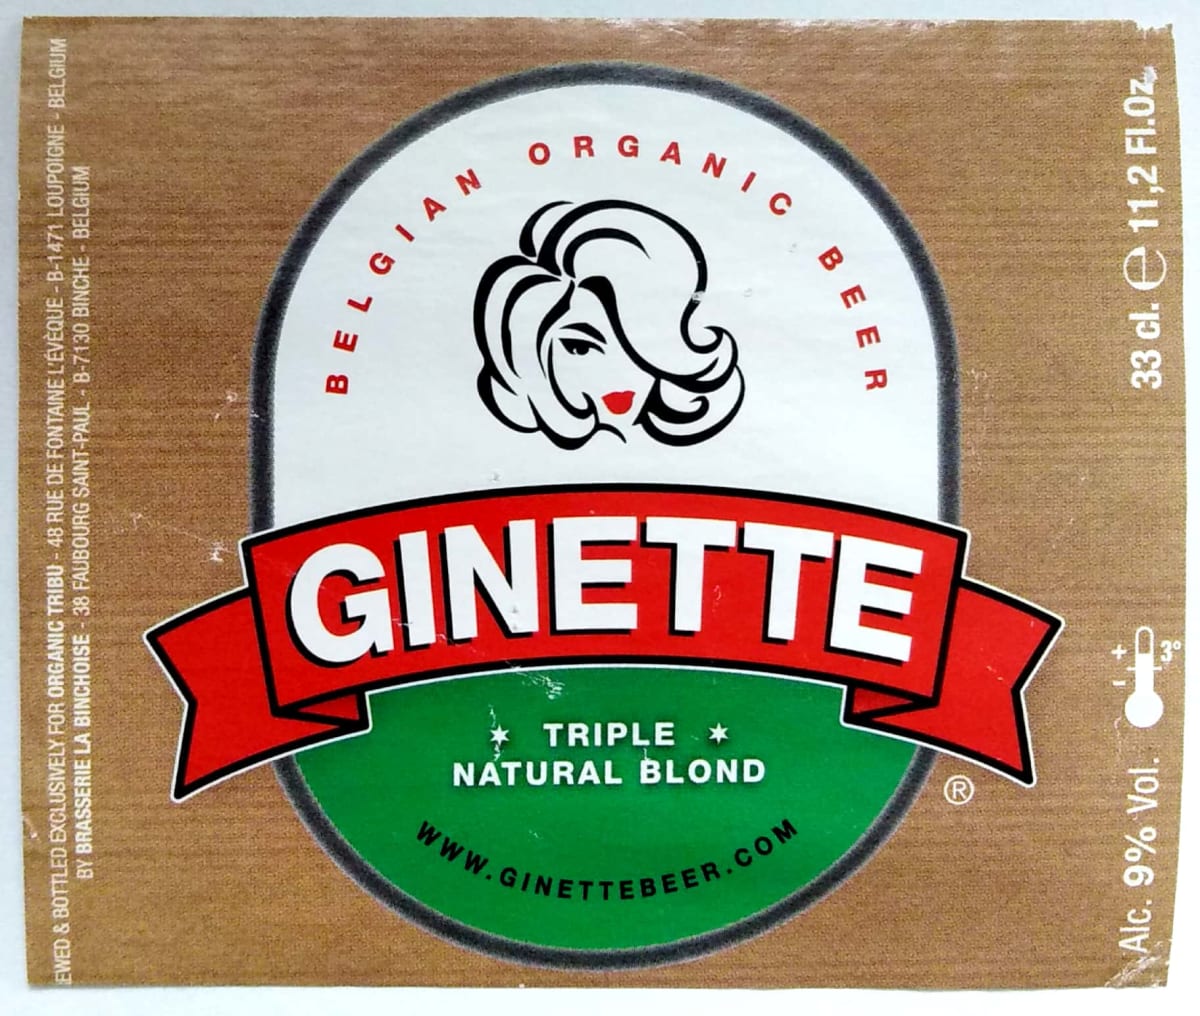 Ginette Triple natural blond